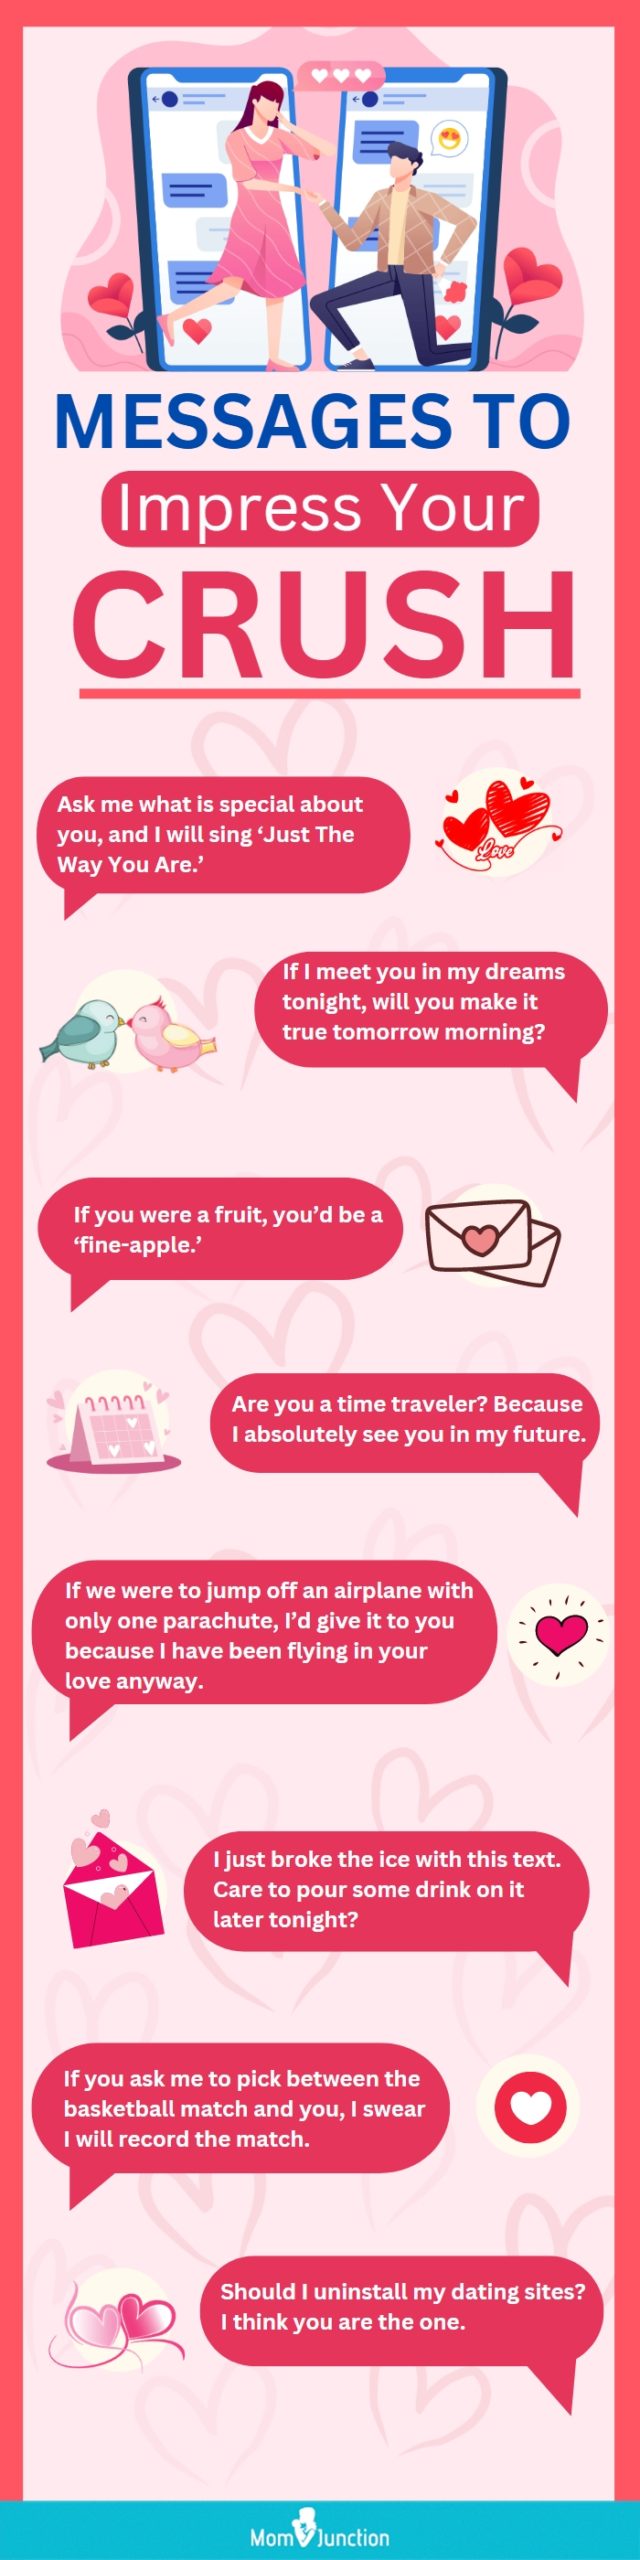 messages to impress your crush (infographic)